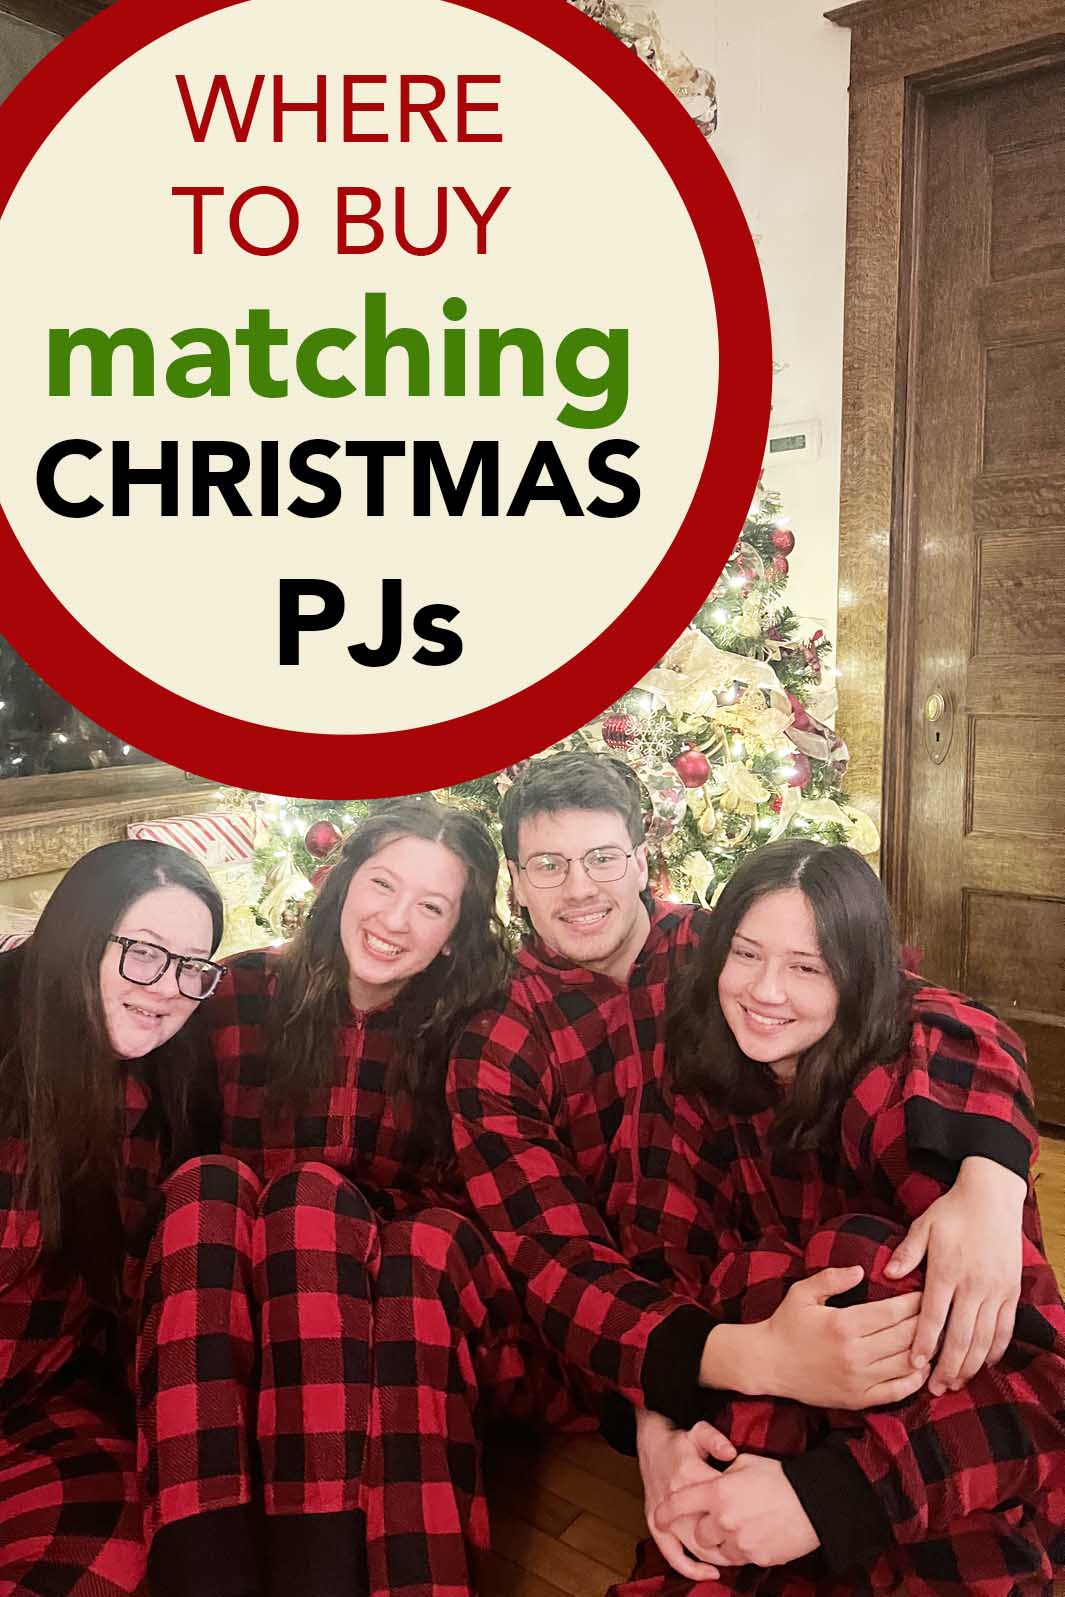 You need matching Christmas jammies for your Christmas Eve family photos! Here are the best places to buy family xmas pajamas! via @lara_neves